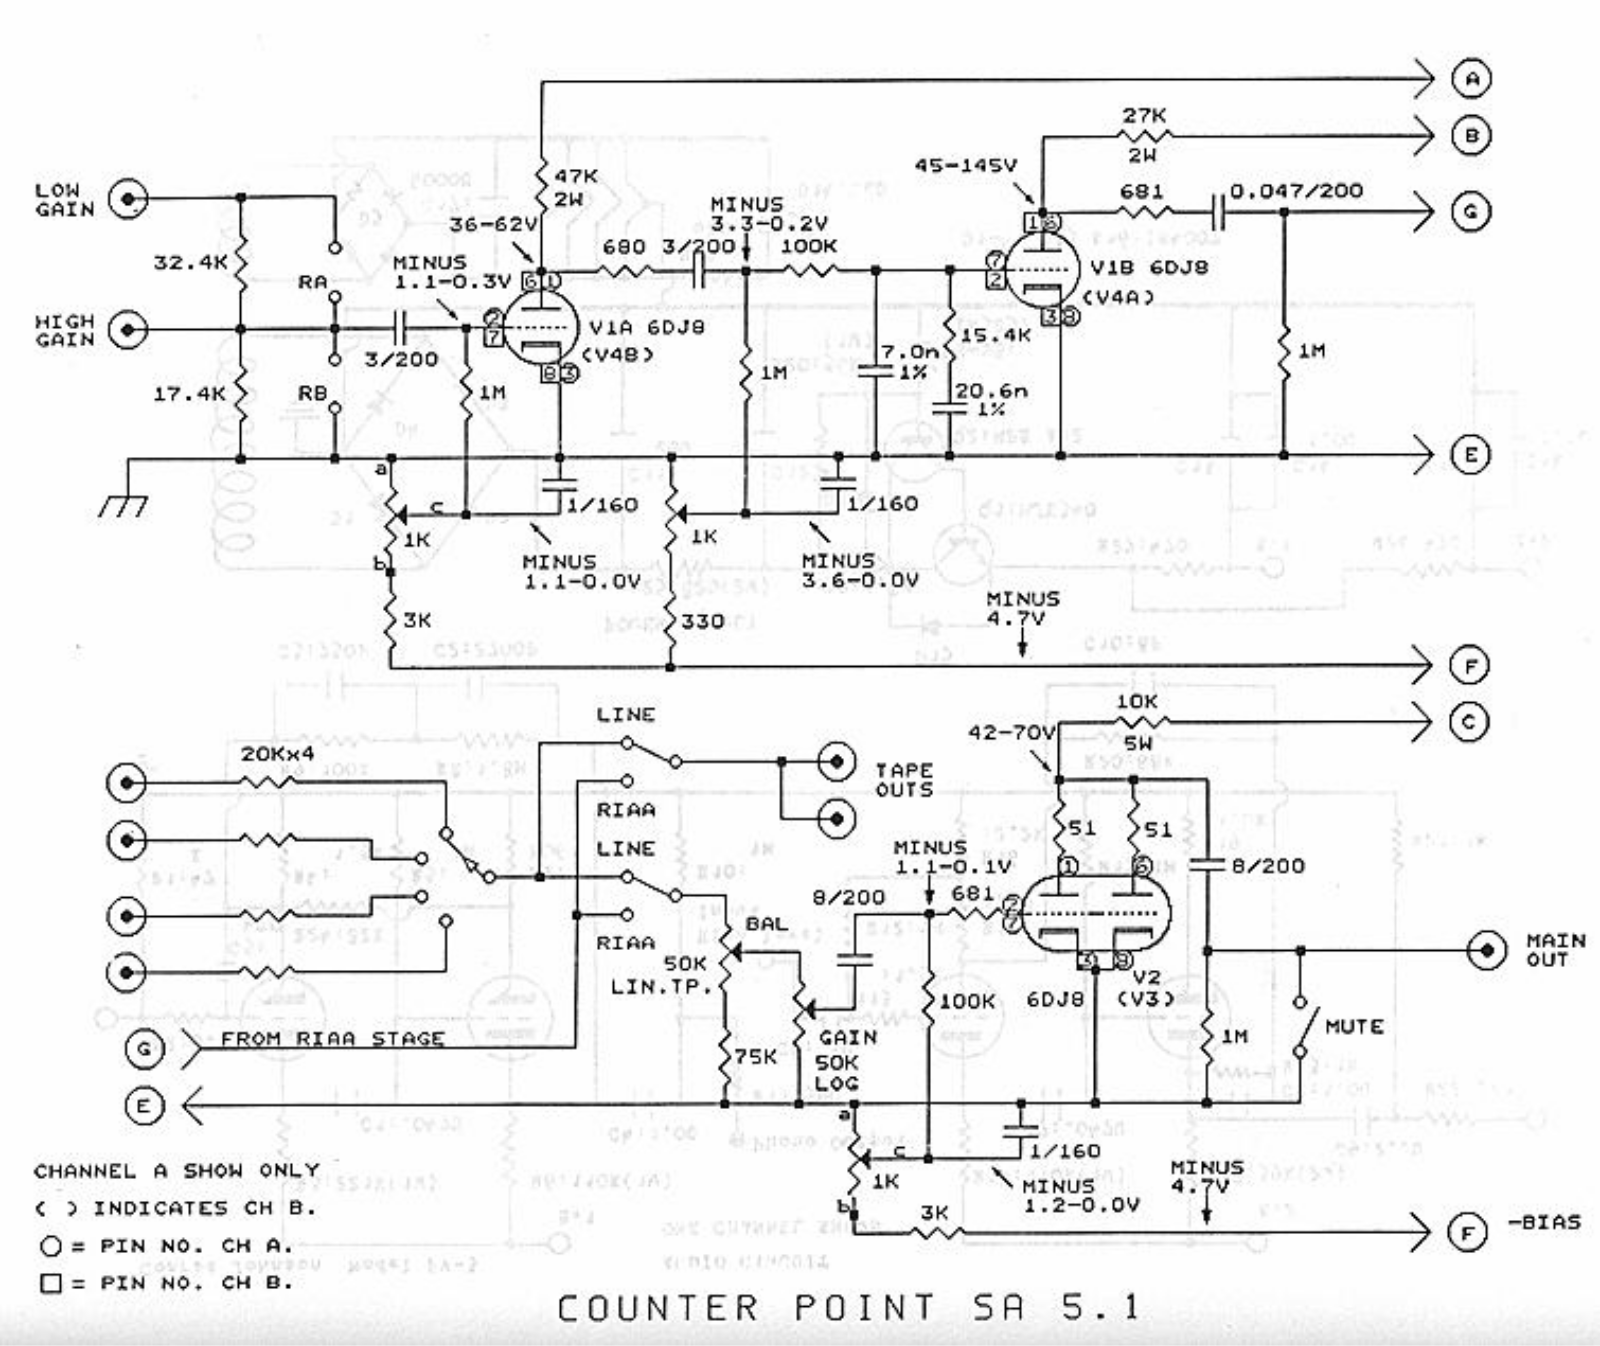 Counterpoint SA-5.1 Schematic